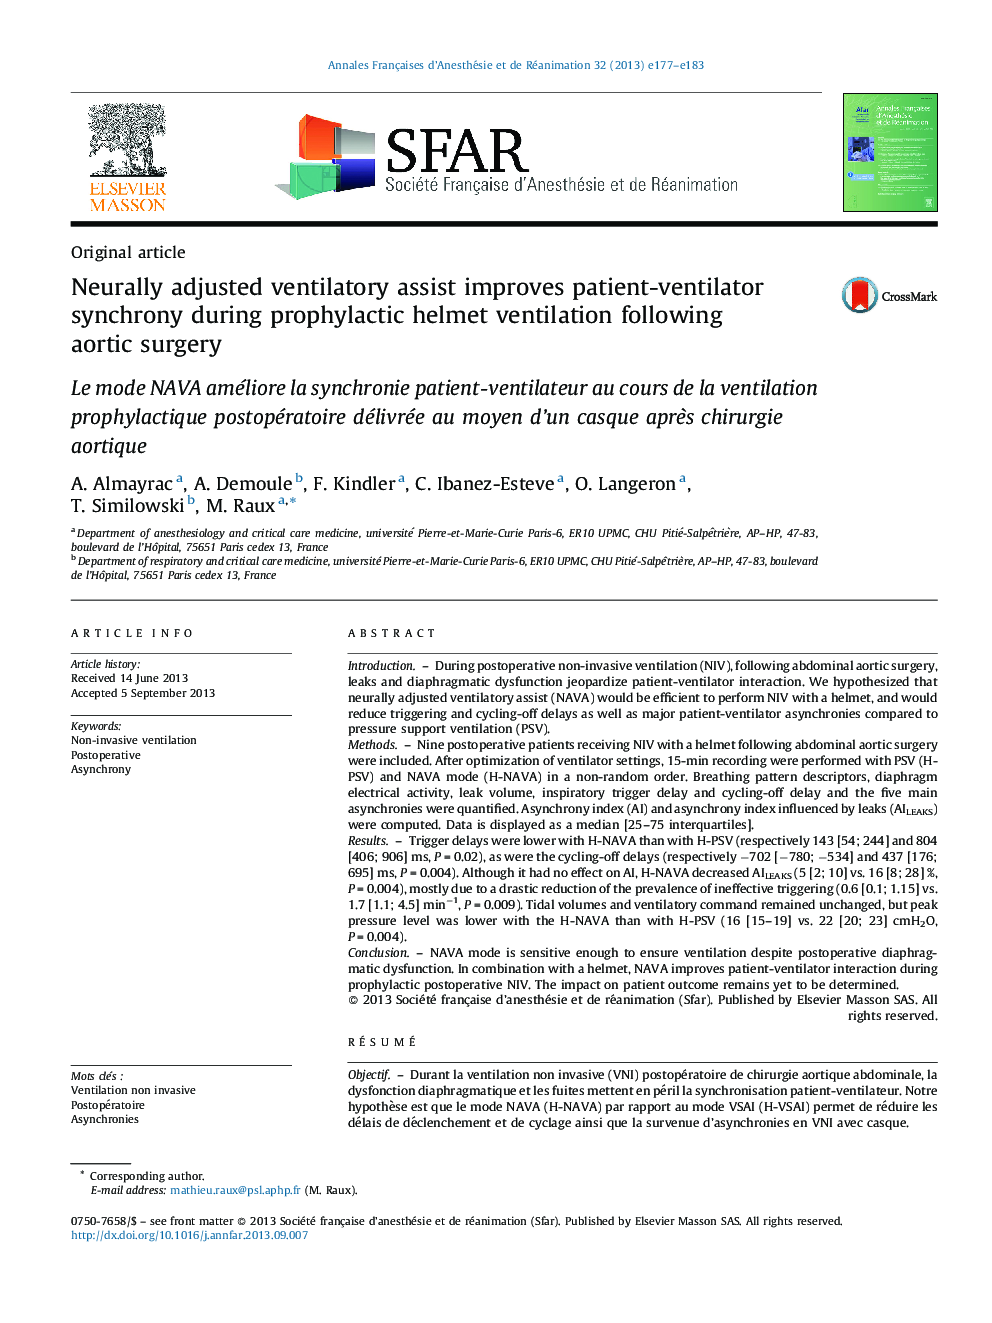 Neurally adjusted ventilatory assist improves patient-ventilator synchrony during prophylactic helmet ventilation following aortic surgery